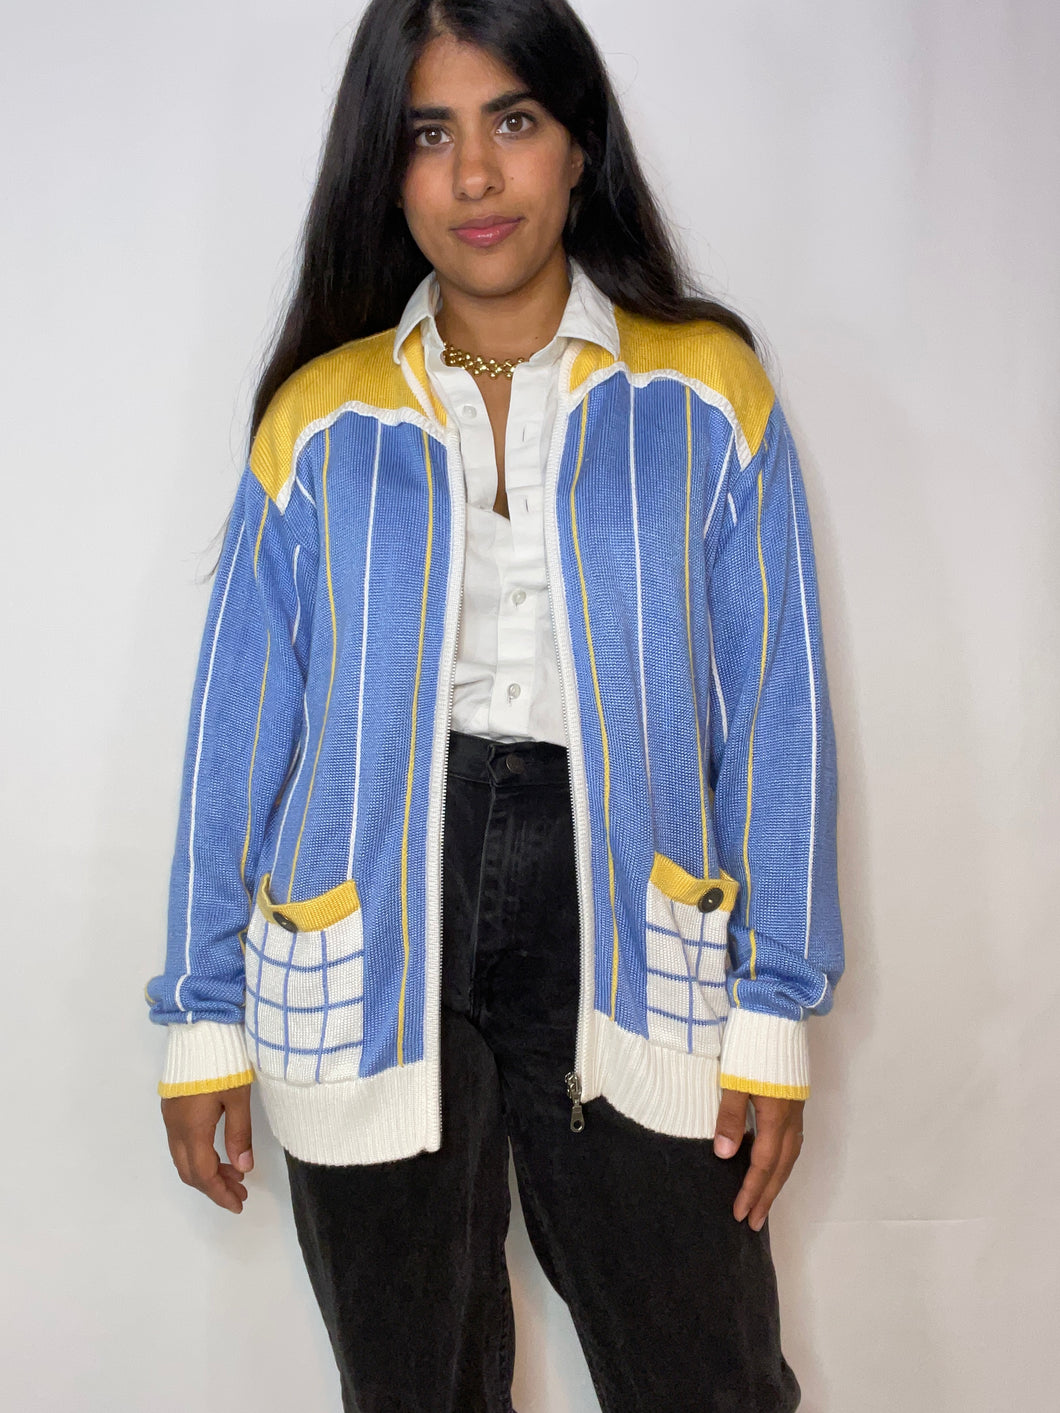 Vintage Blue and Yellow Italian Knit Jacket (M/L)